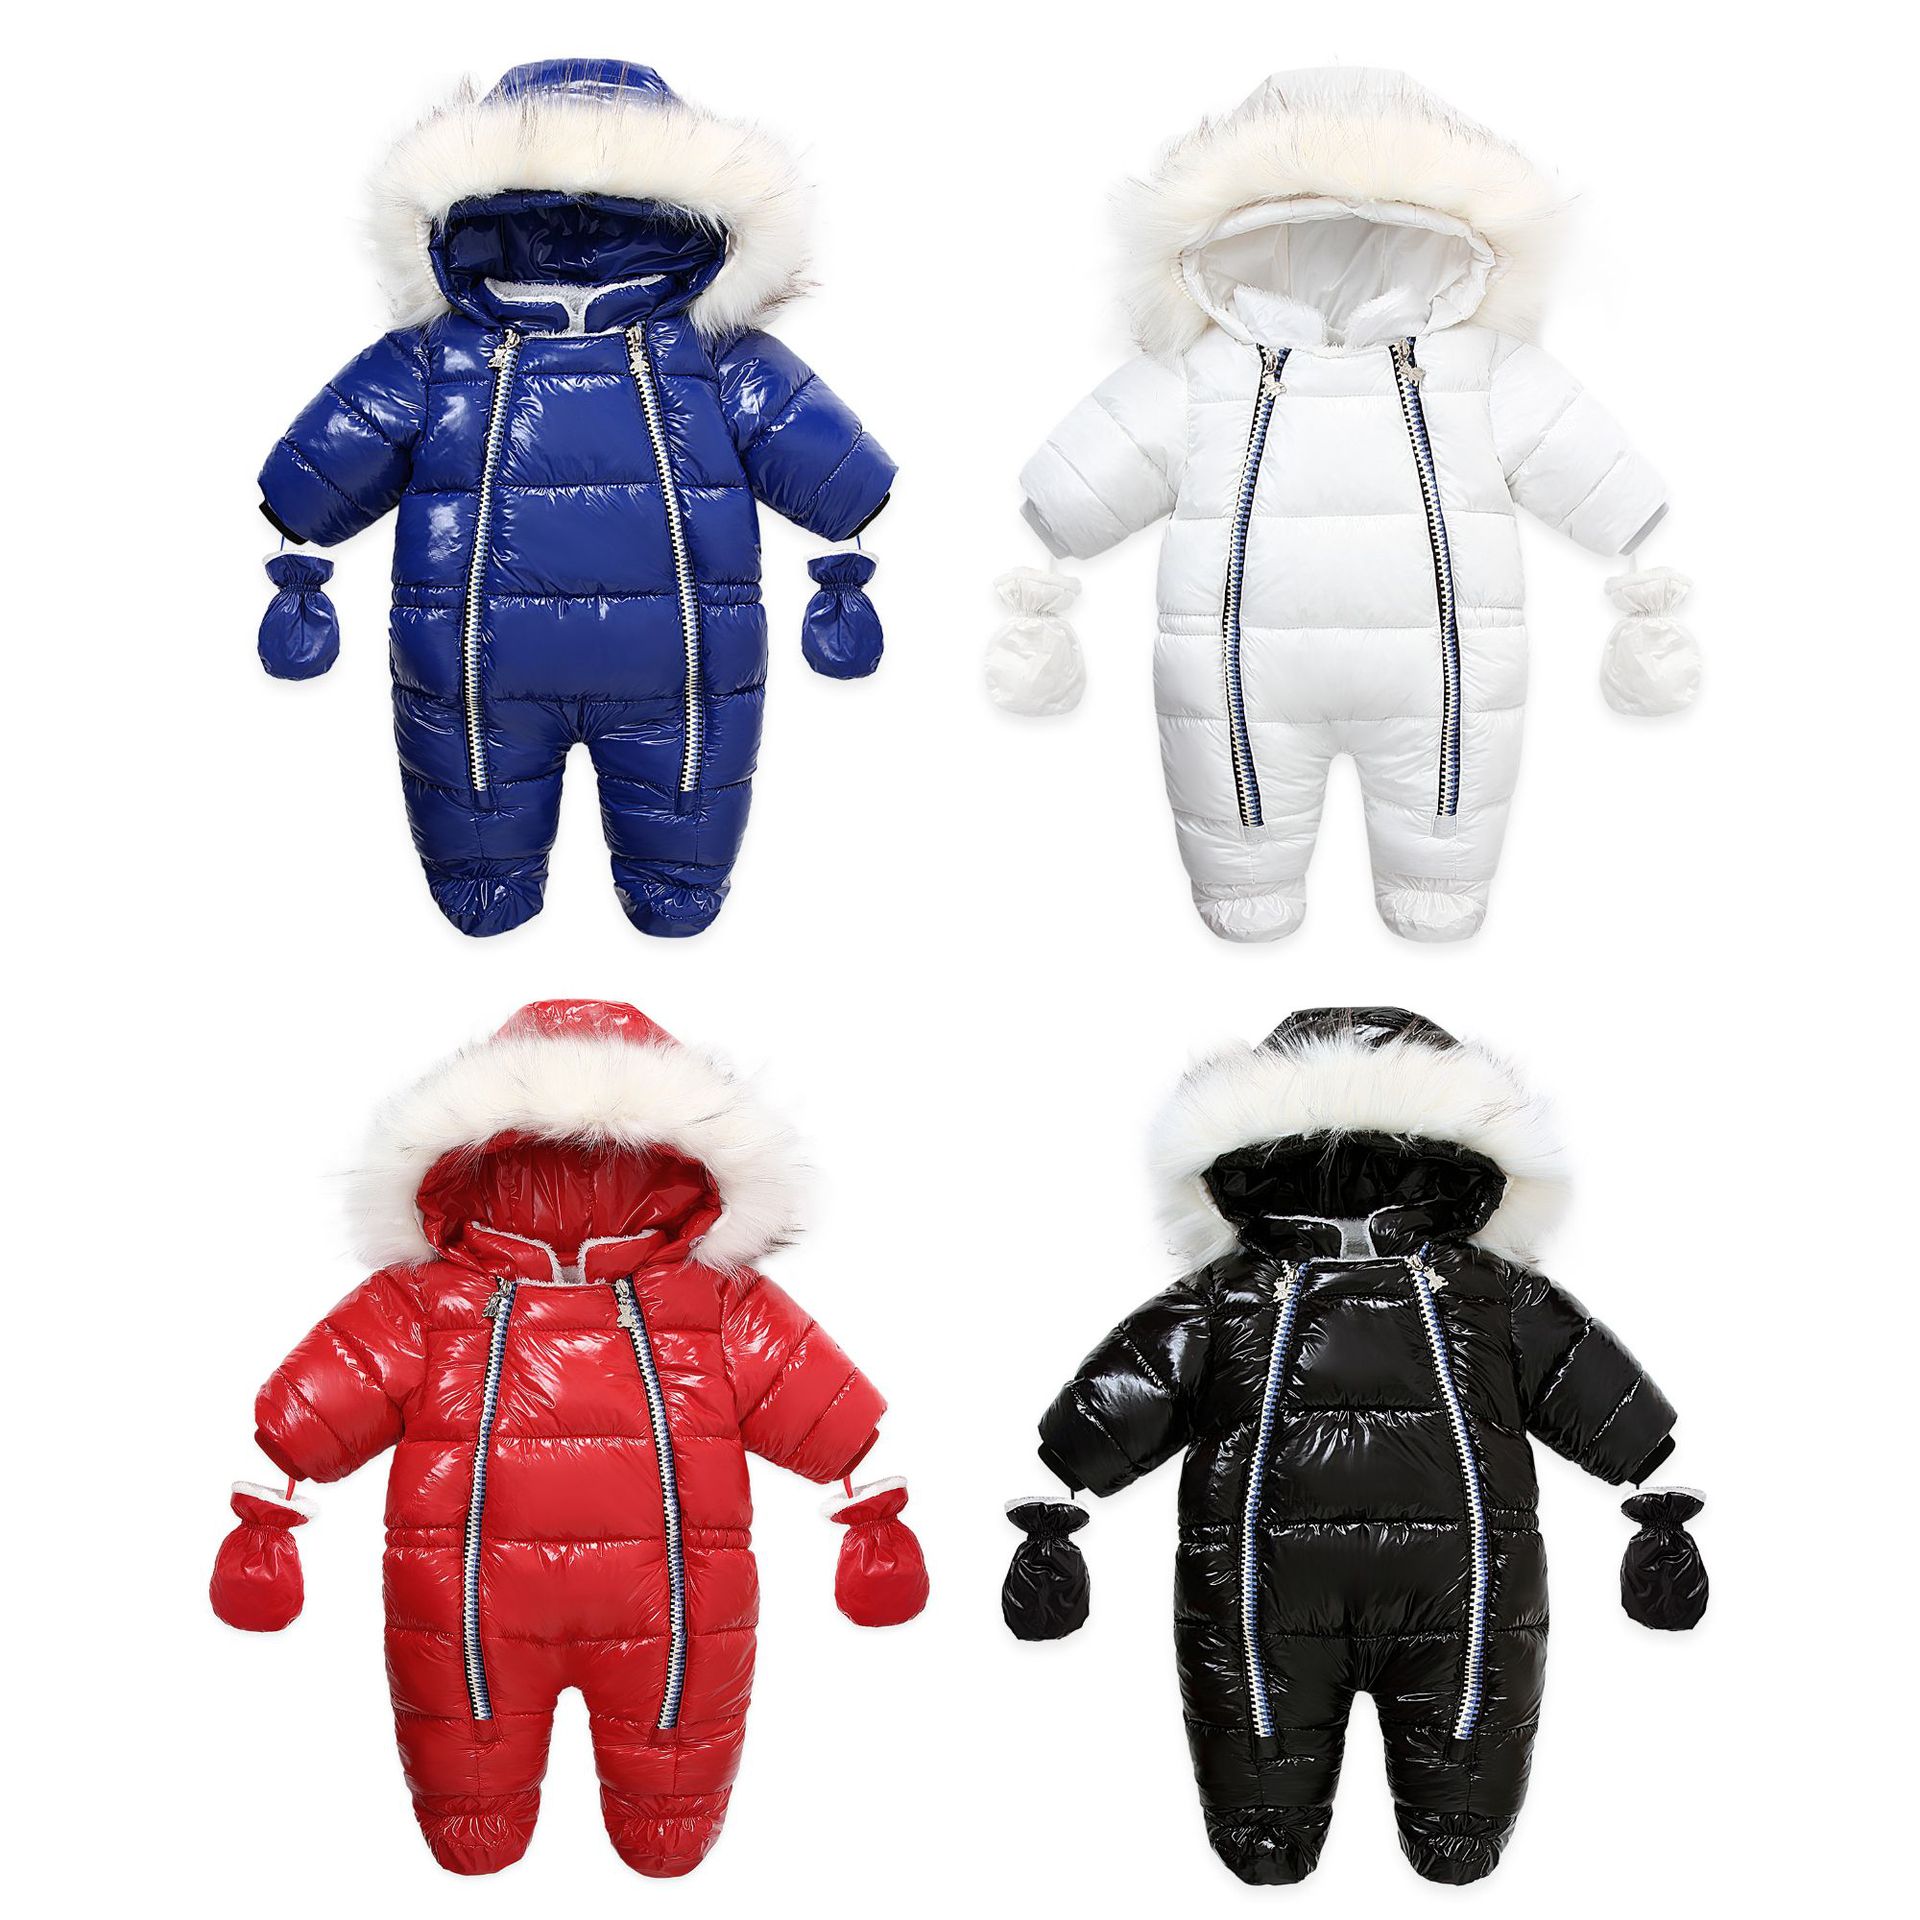 

Baby new winter warmer Thicker PU fur collar rompers  boys girls Christmas 0-24M Romper Toddle infant bodysuit Children one-piece onesies Jumpsuits, Pls pay the different price